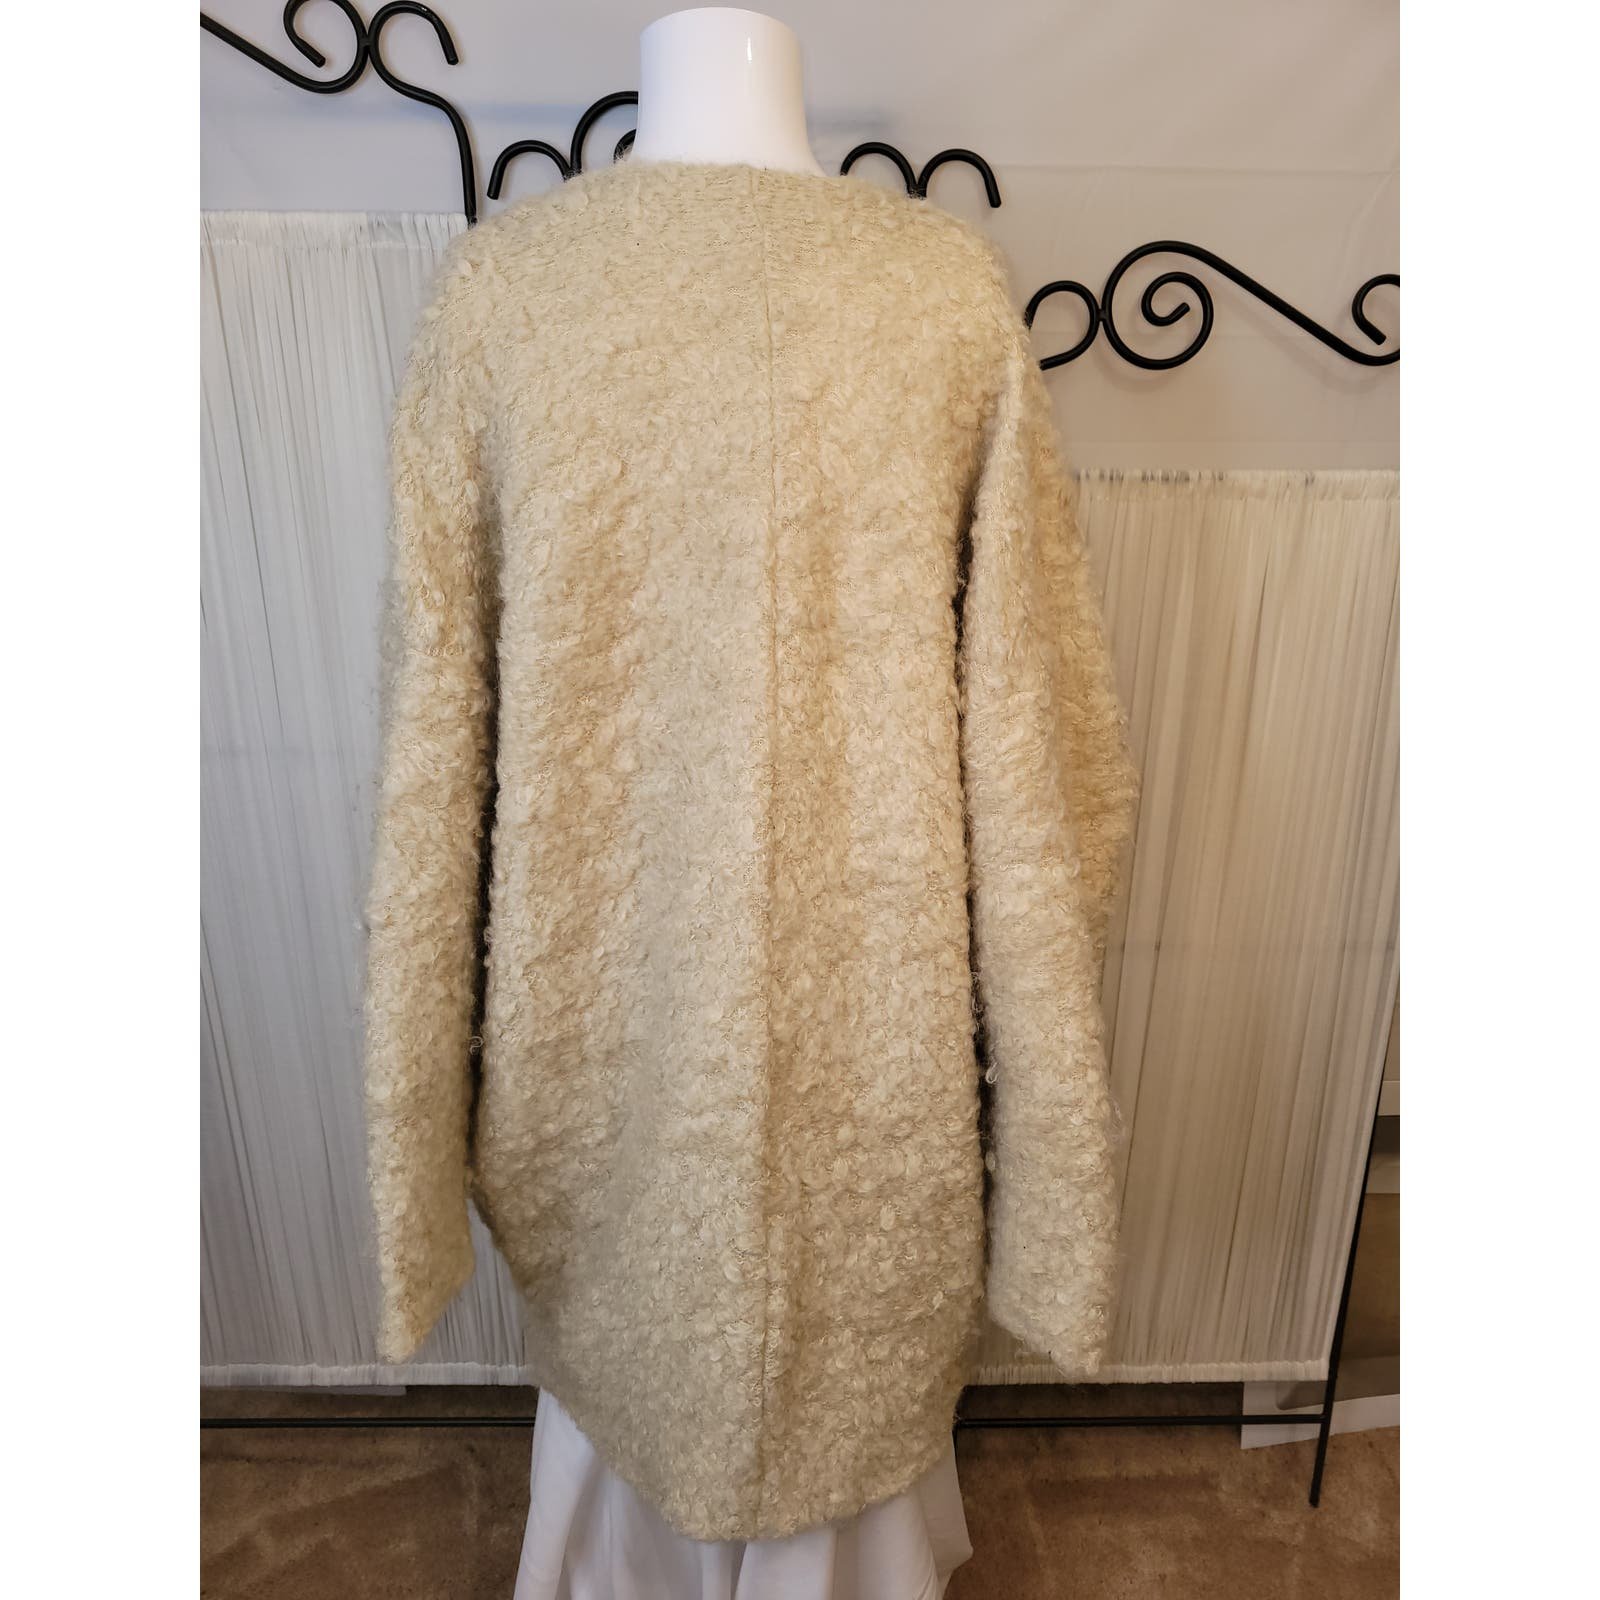 Amazing H&M size S womens cardigan sweater wool mohair open front mBdh6BF33 Hot Sale